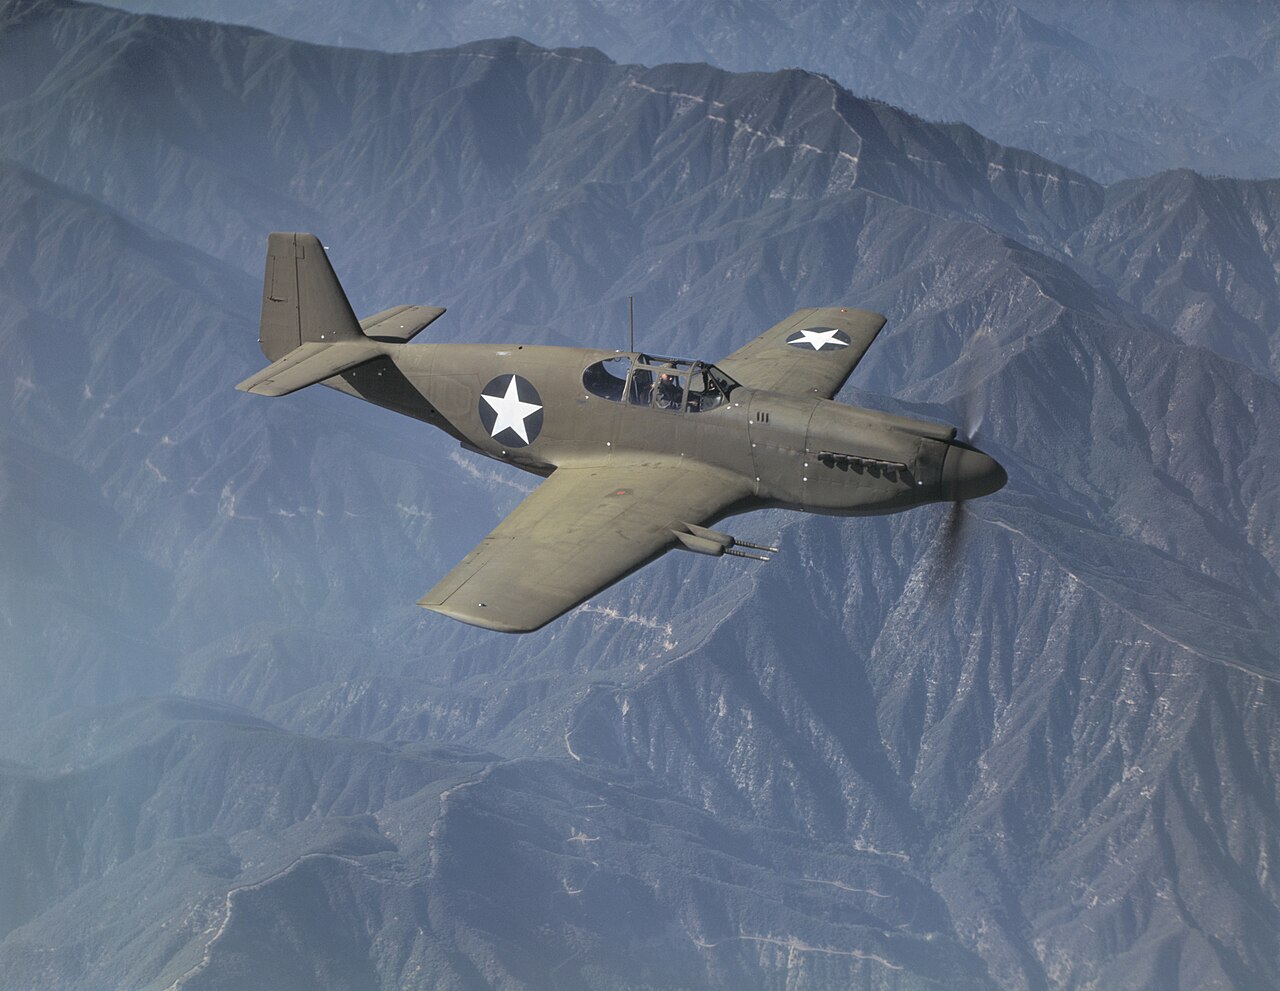 1280px-North_American_Mustang_Mk.IA_in_flight_over_California_%28USA%29%2C_in_October_1942_%28fsac.1a35324%29.jpg